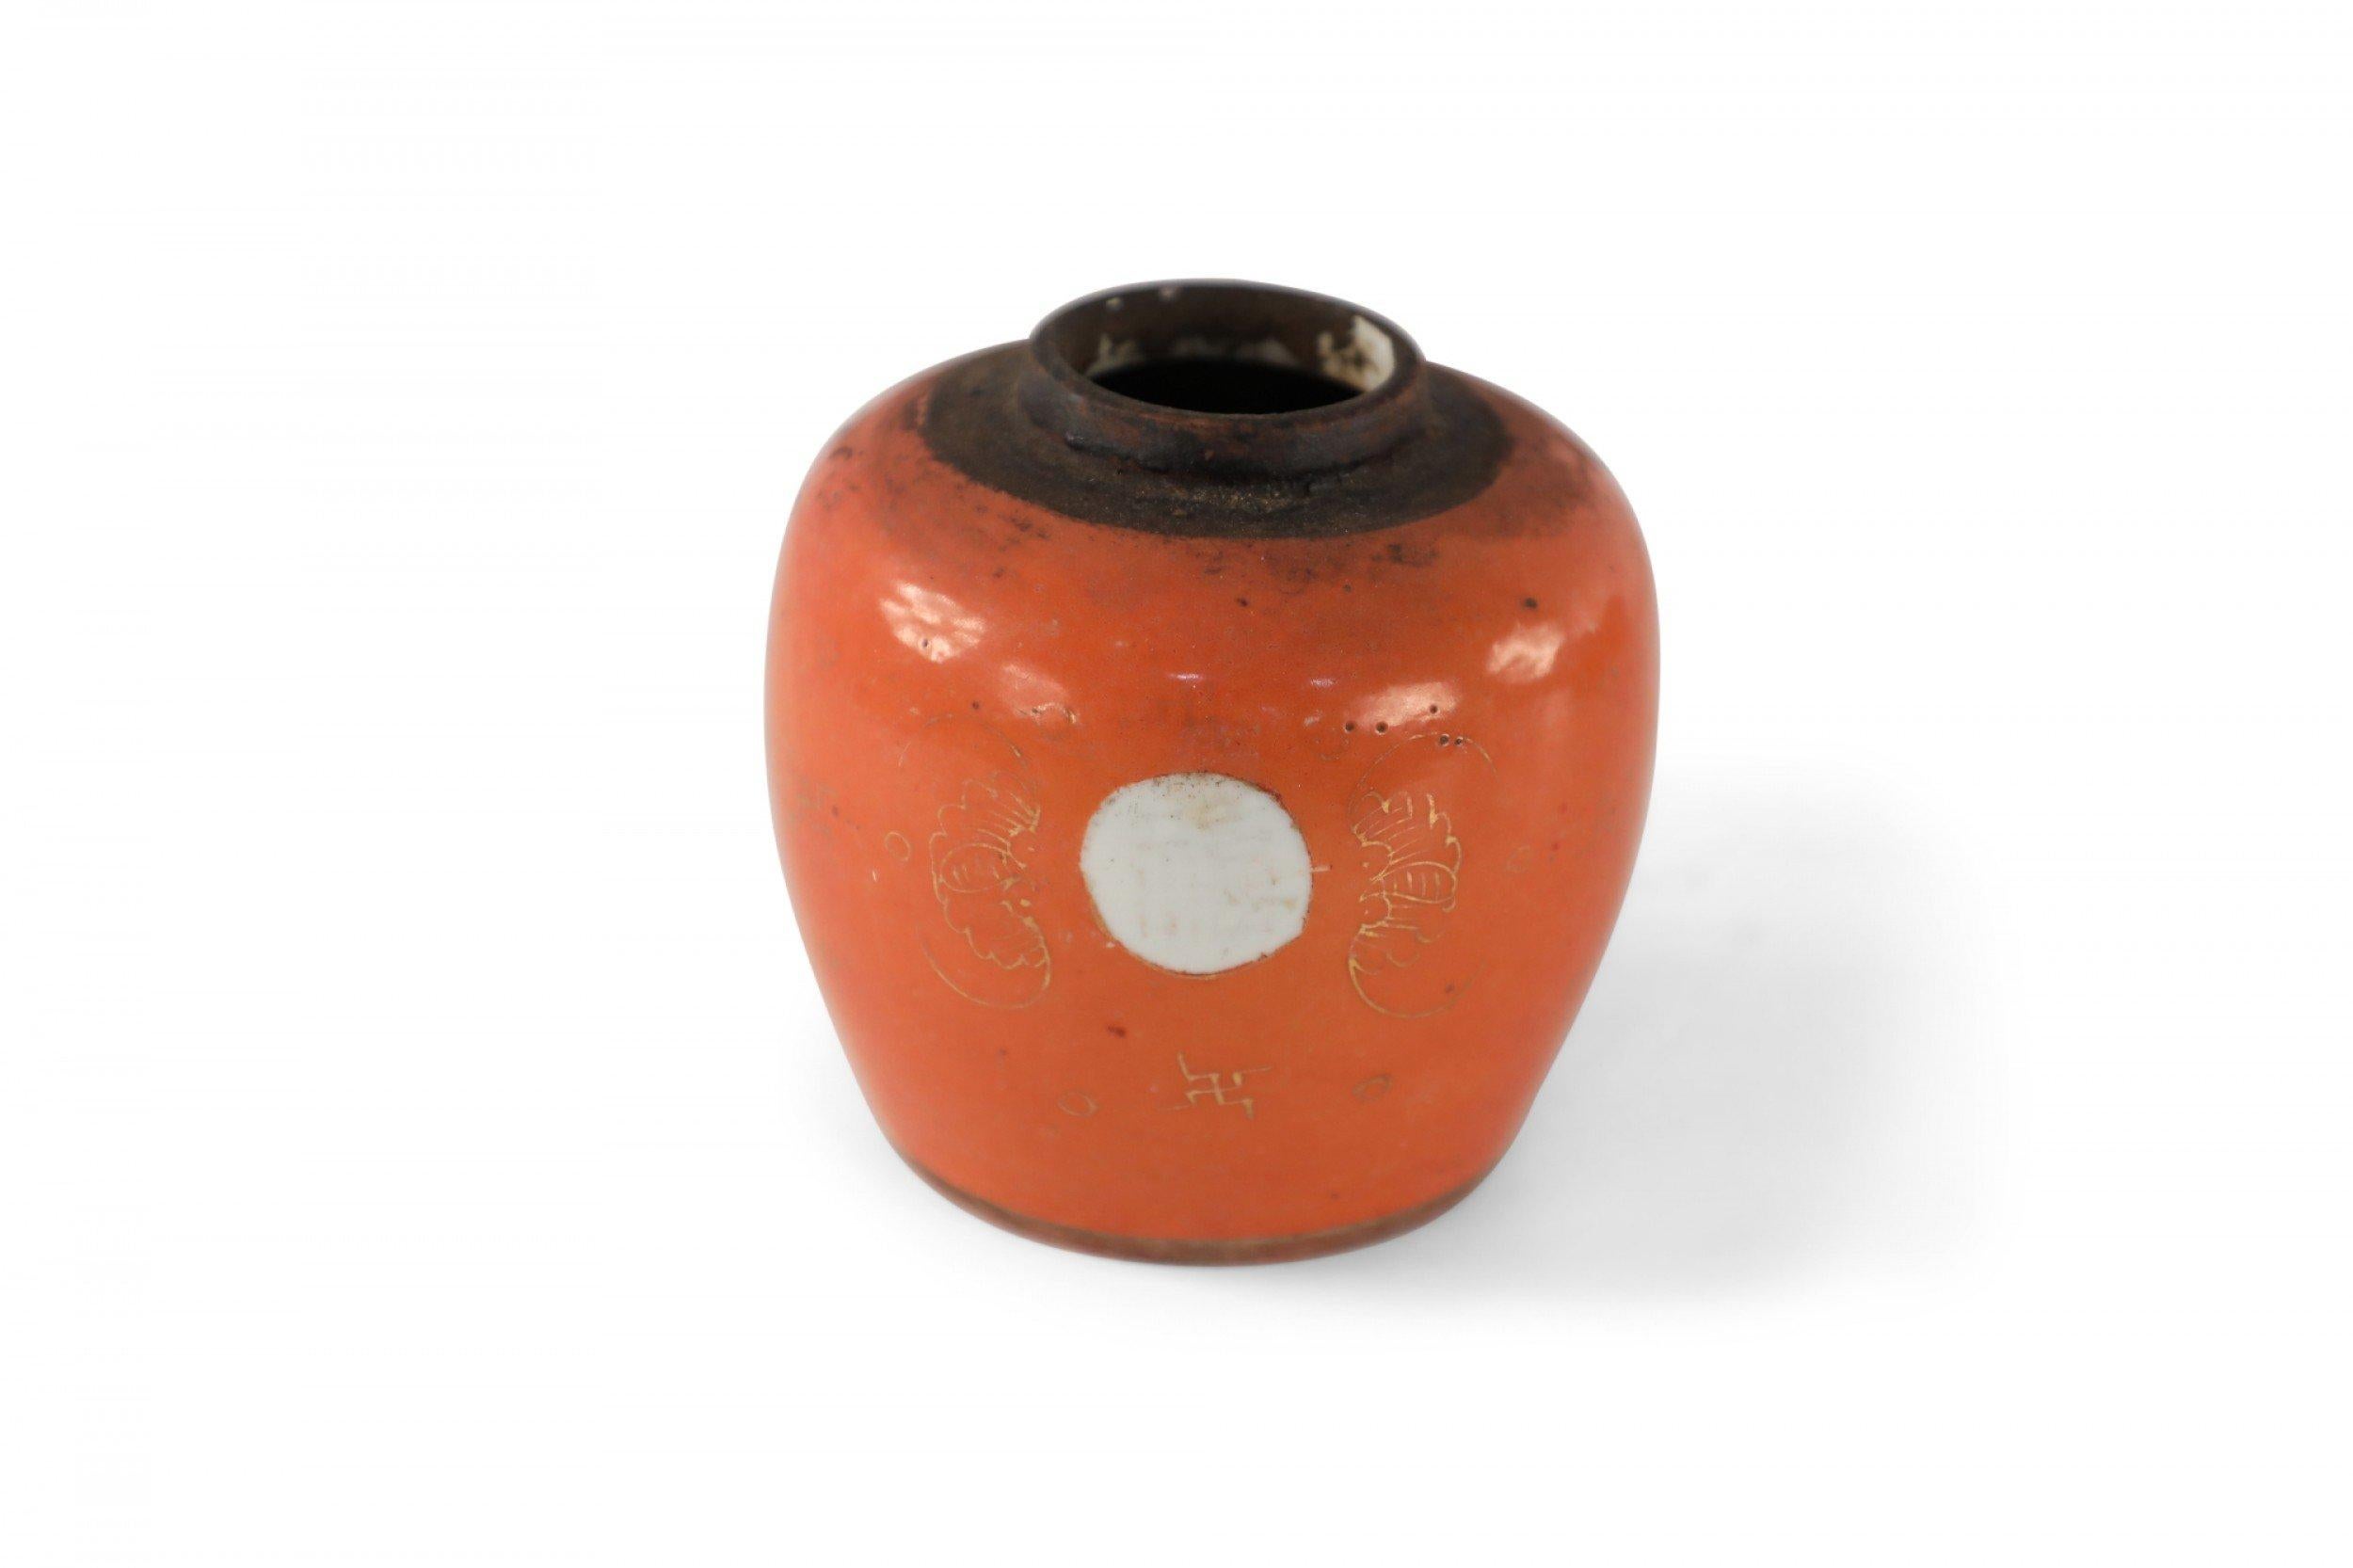 Chinese small, round orange porcelain vase with gold detailing surrounding white circular shapes and a brown band around the mouth opening.
 